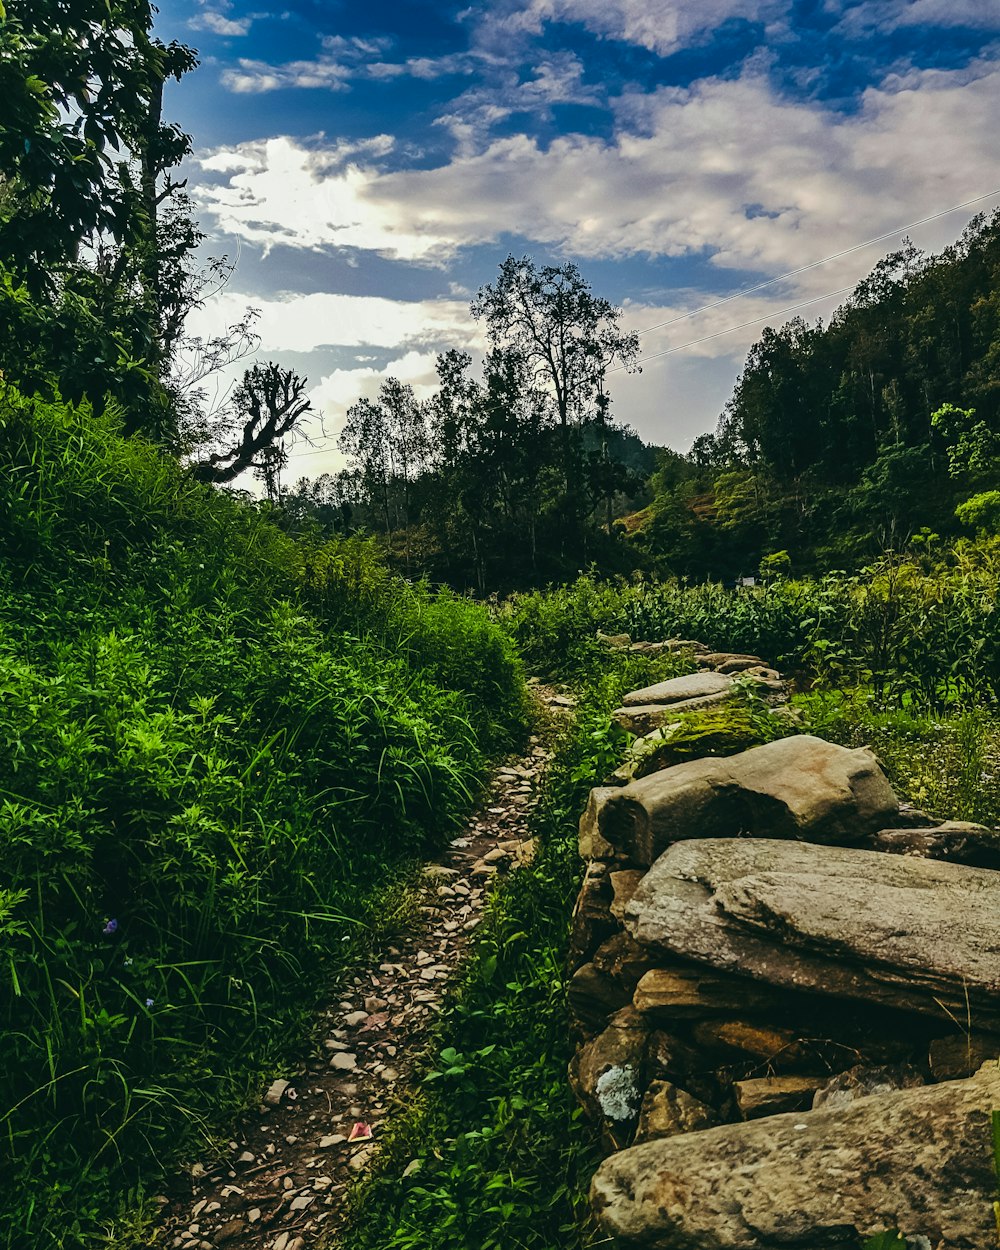 a rocky path in the middle of a lush green forest